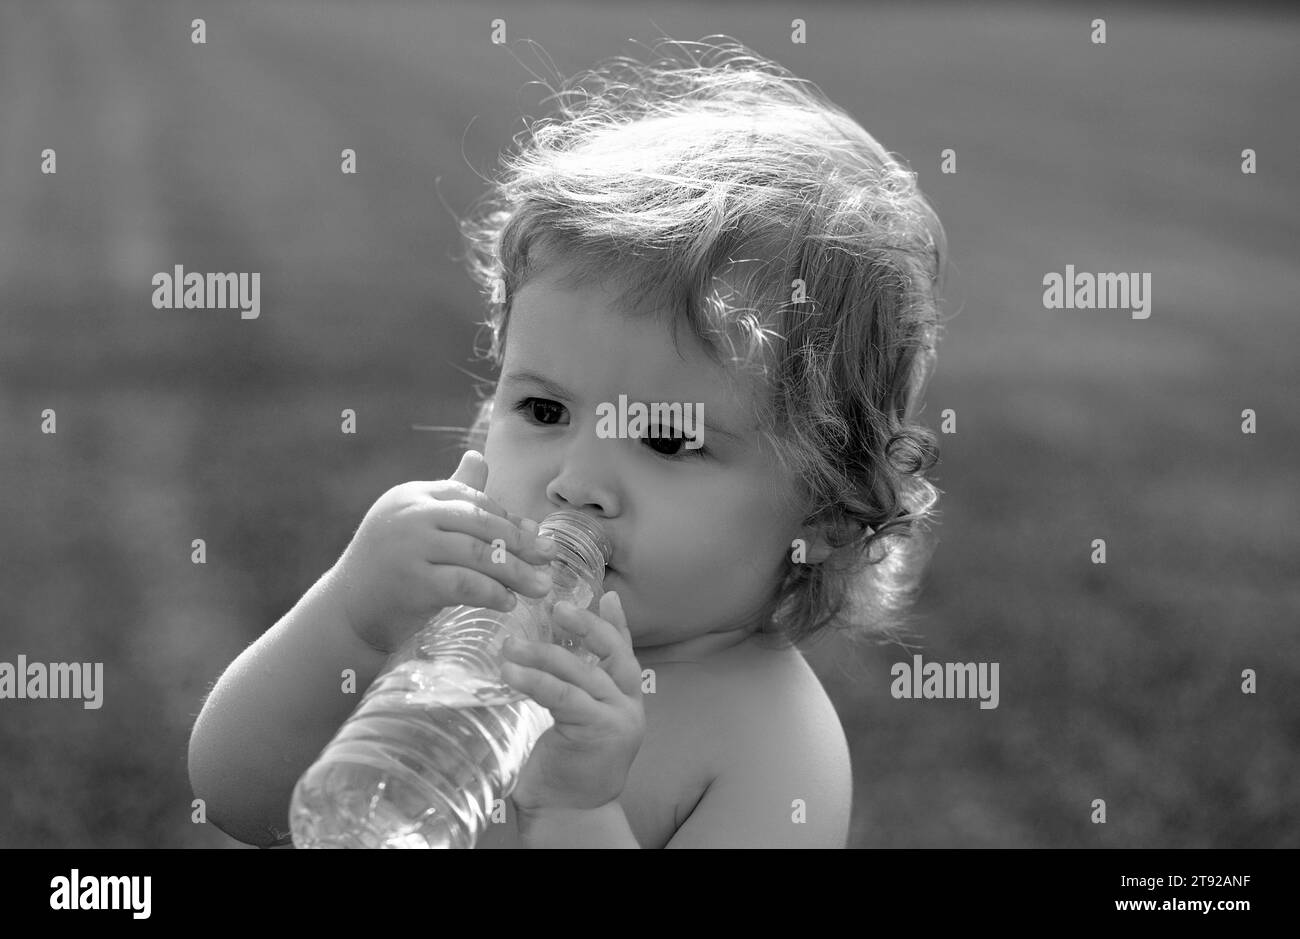 Baby drinking water. Child drinking water from bottle outdoor on grass background. Stock Photo